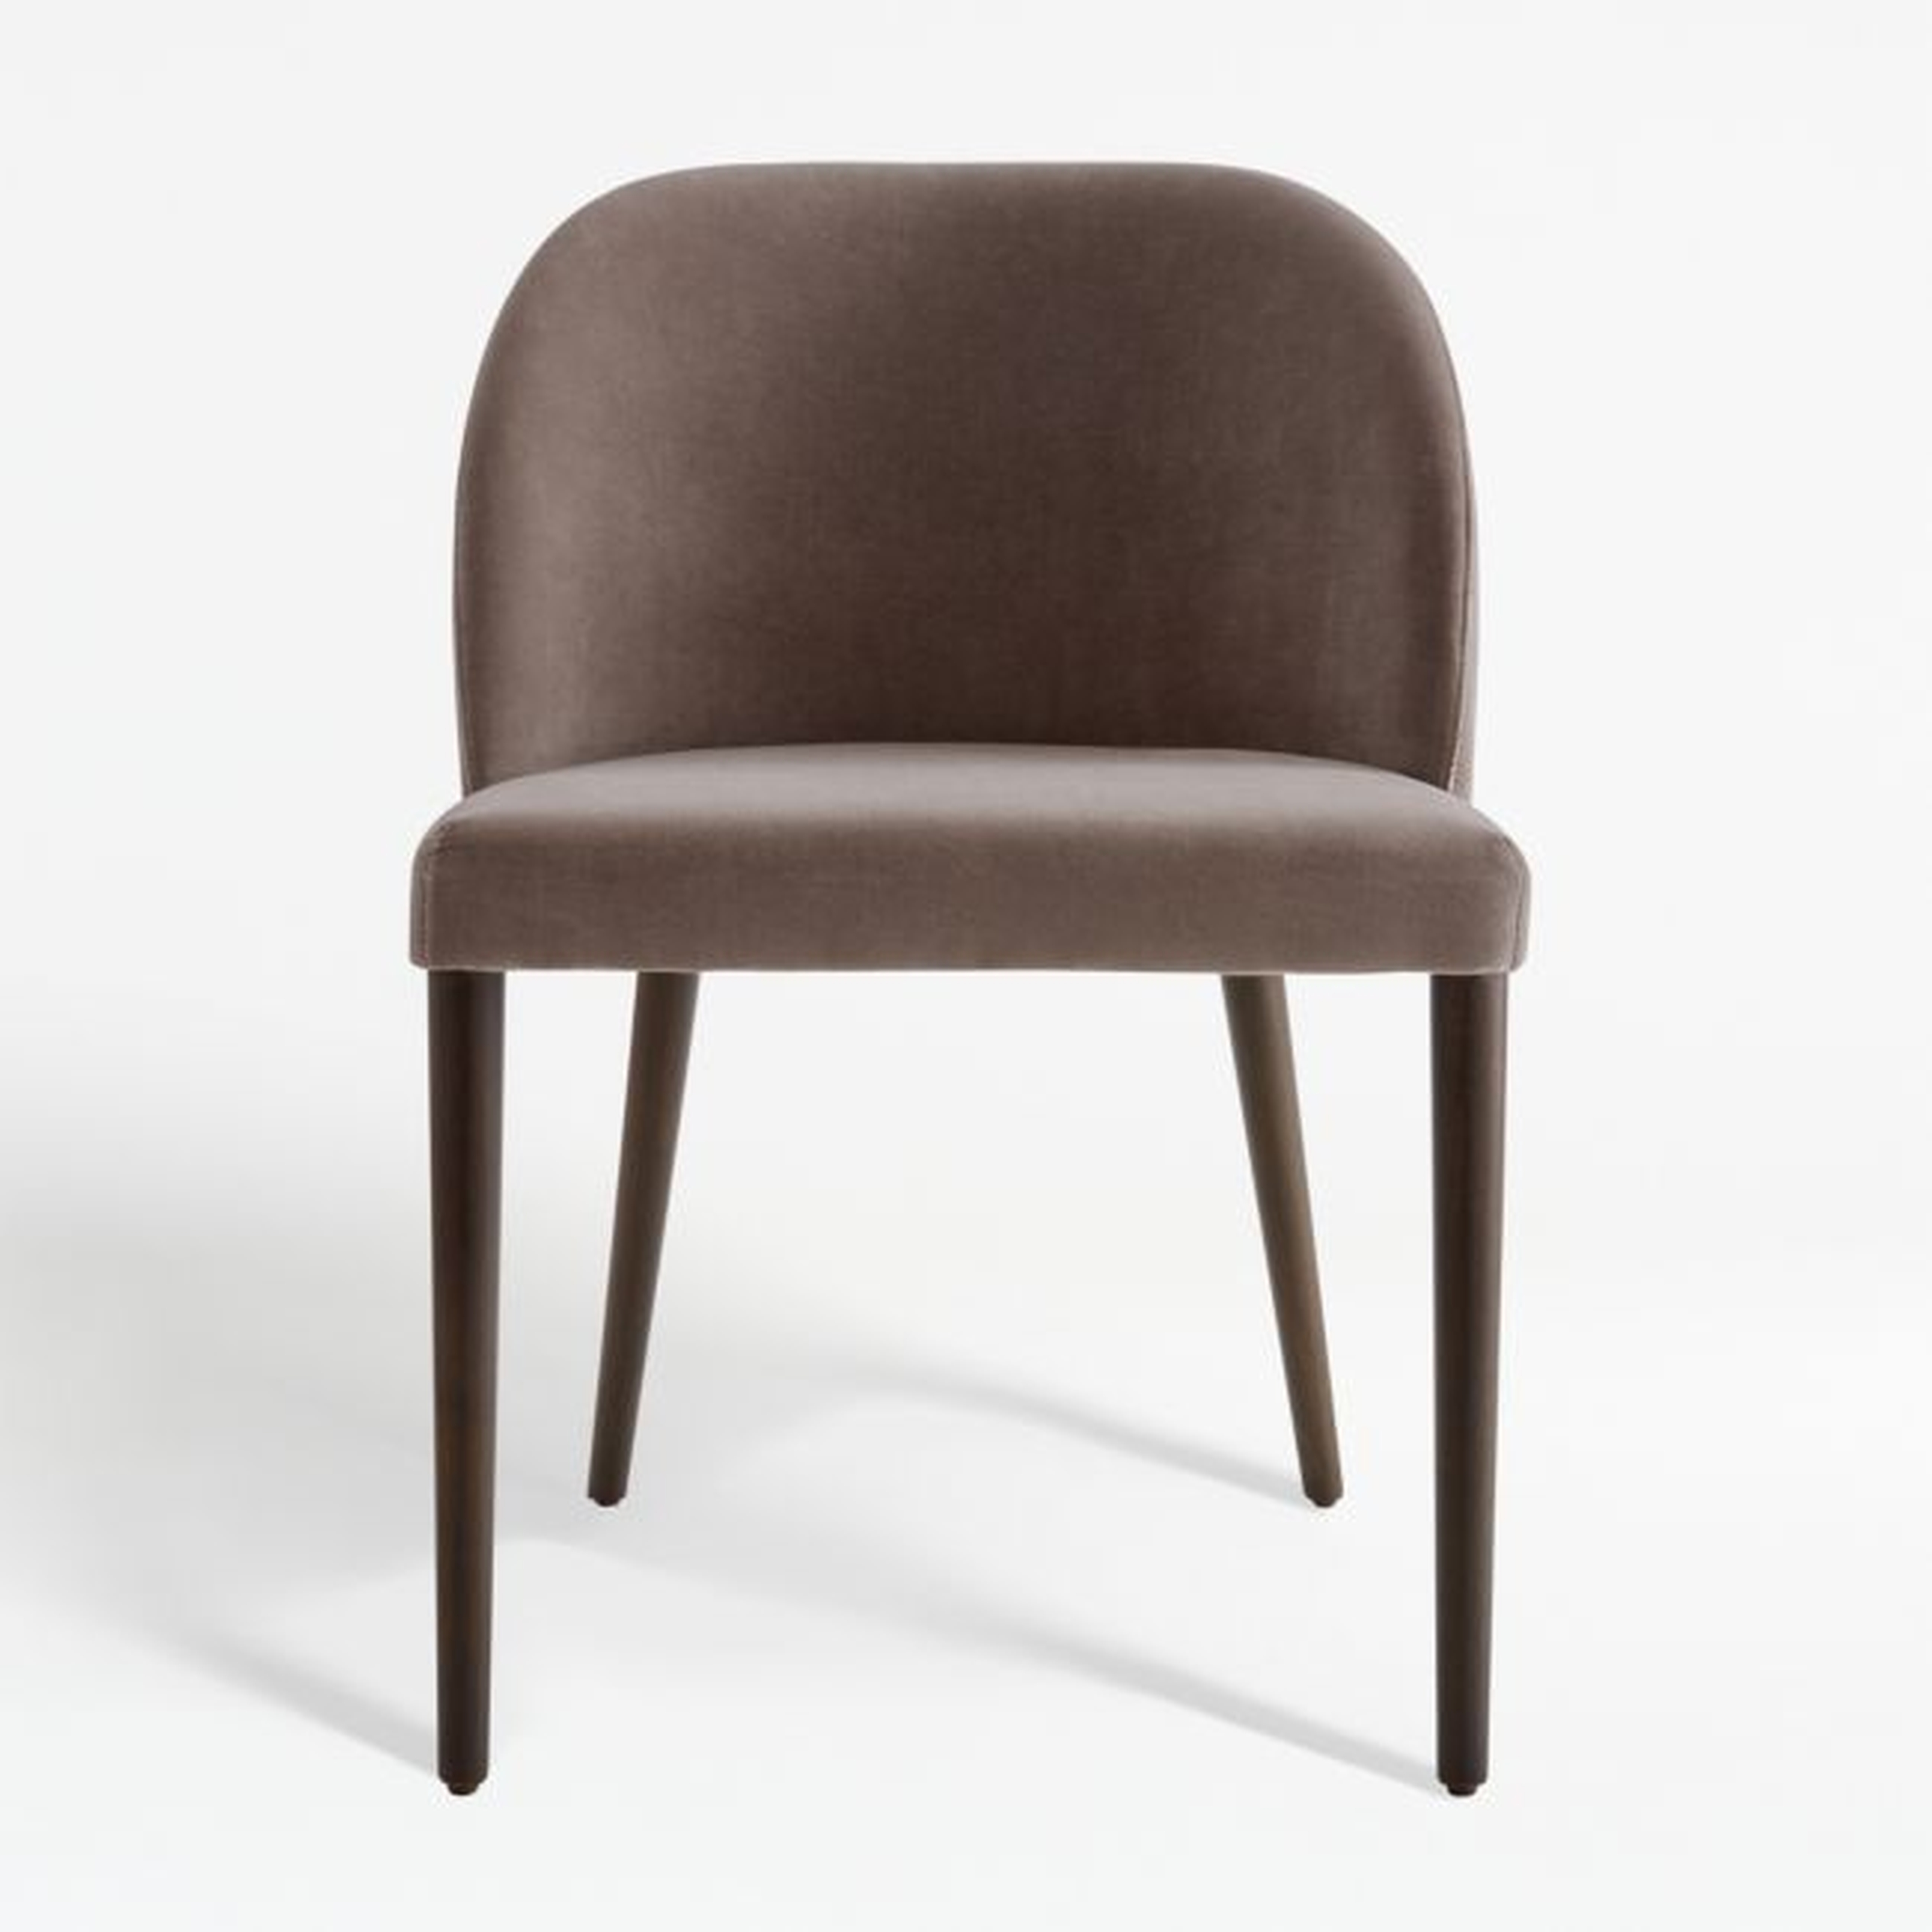 Camille Taupe Italian Dining Chair - Crate and Barrel